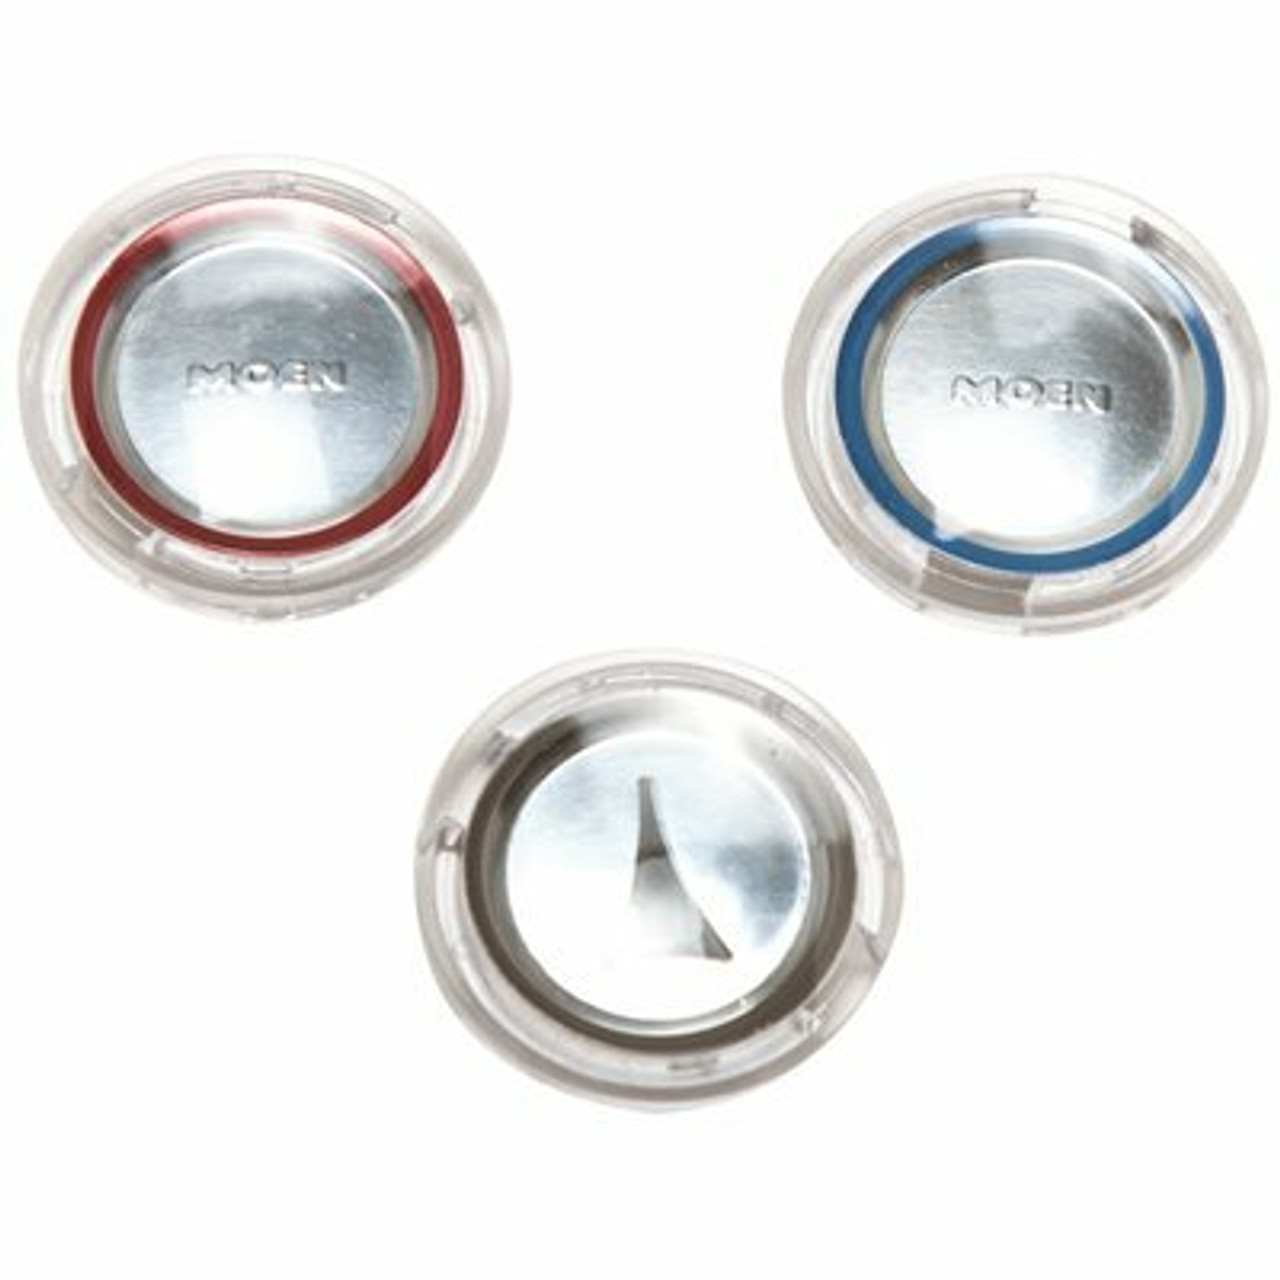 Moen Chateau Hot And Cold Buttons